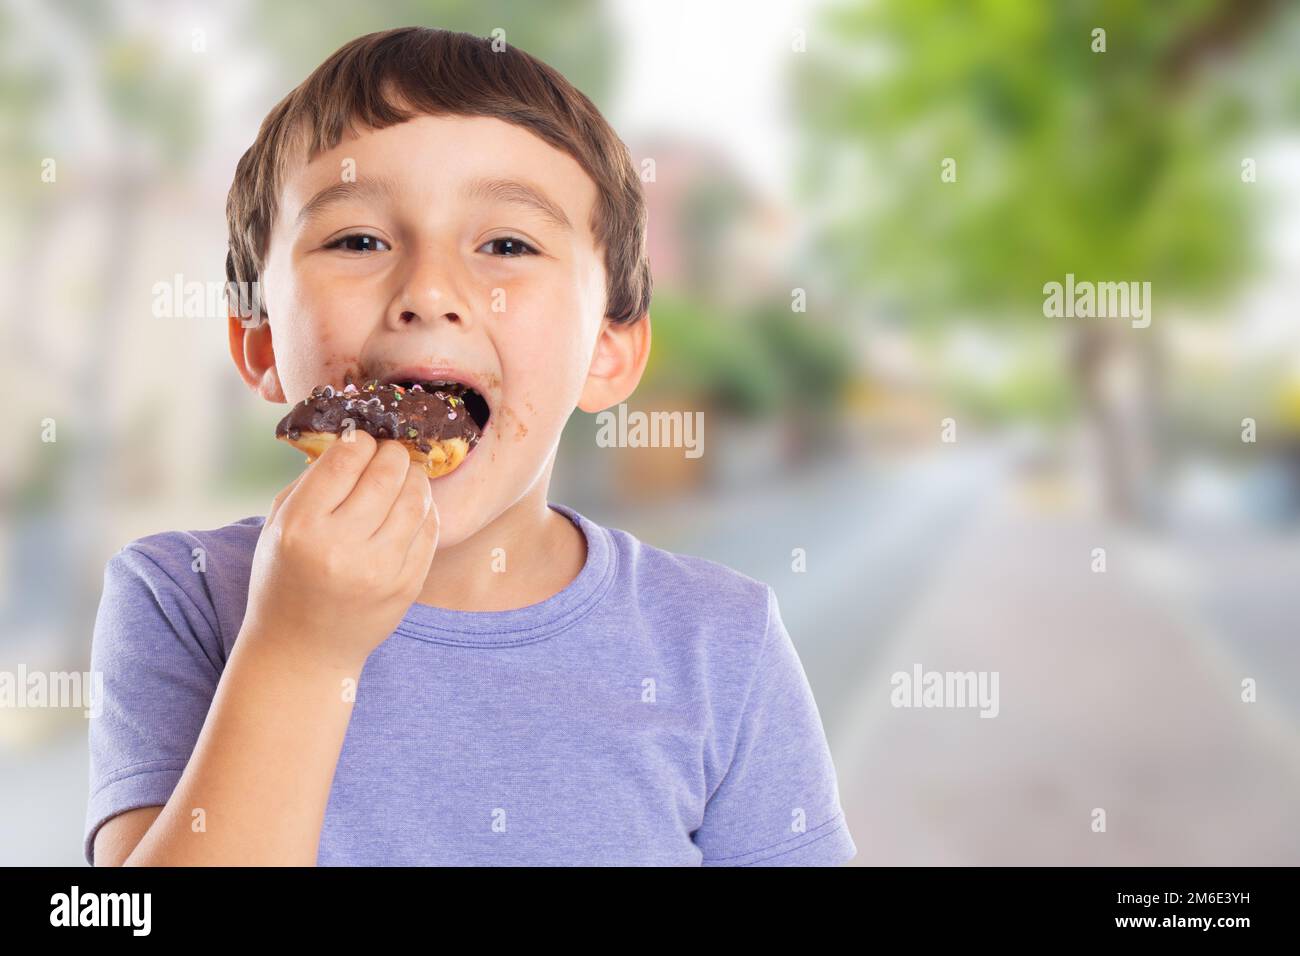 Portrait of a young boy child eating donut town copyspace copy space unhealthy sweet sweets Stock Photo